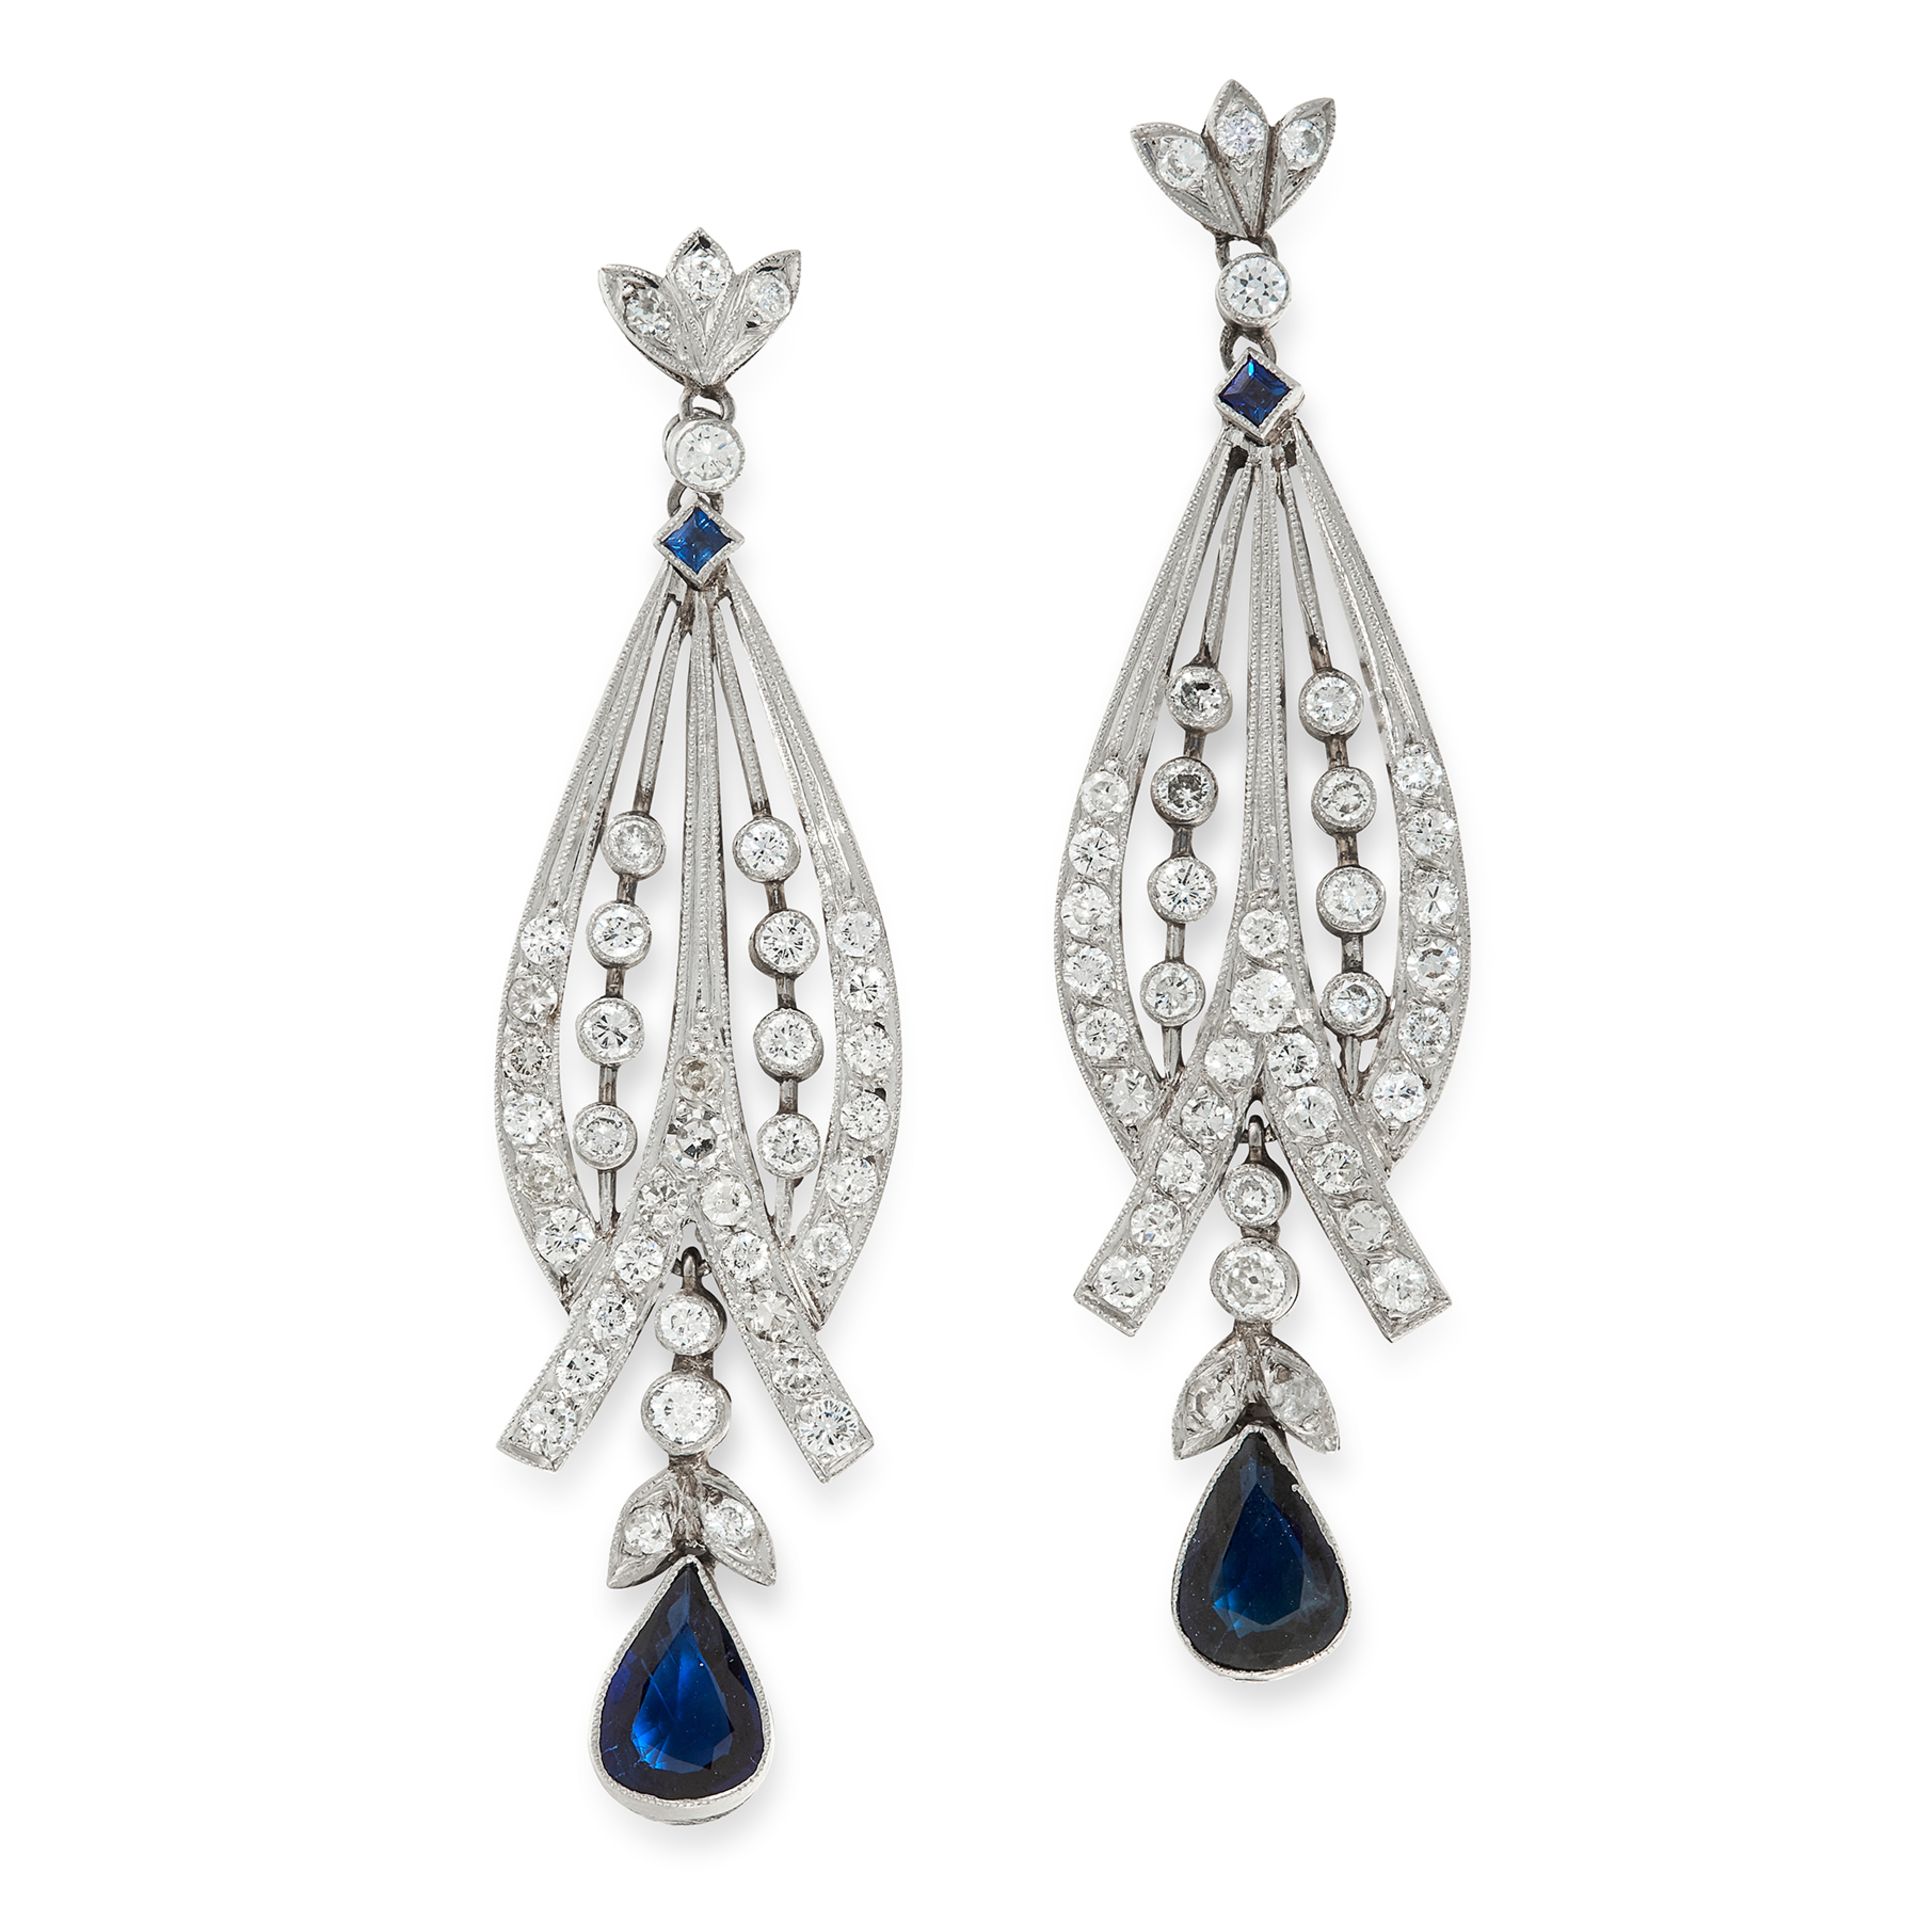 A PAIR OF SAPPHIRE AND DIAMOND DROP EARRINGS in decorated teardrop form, the central body is set